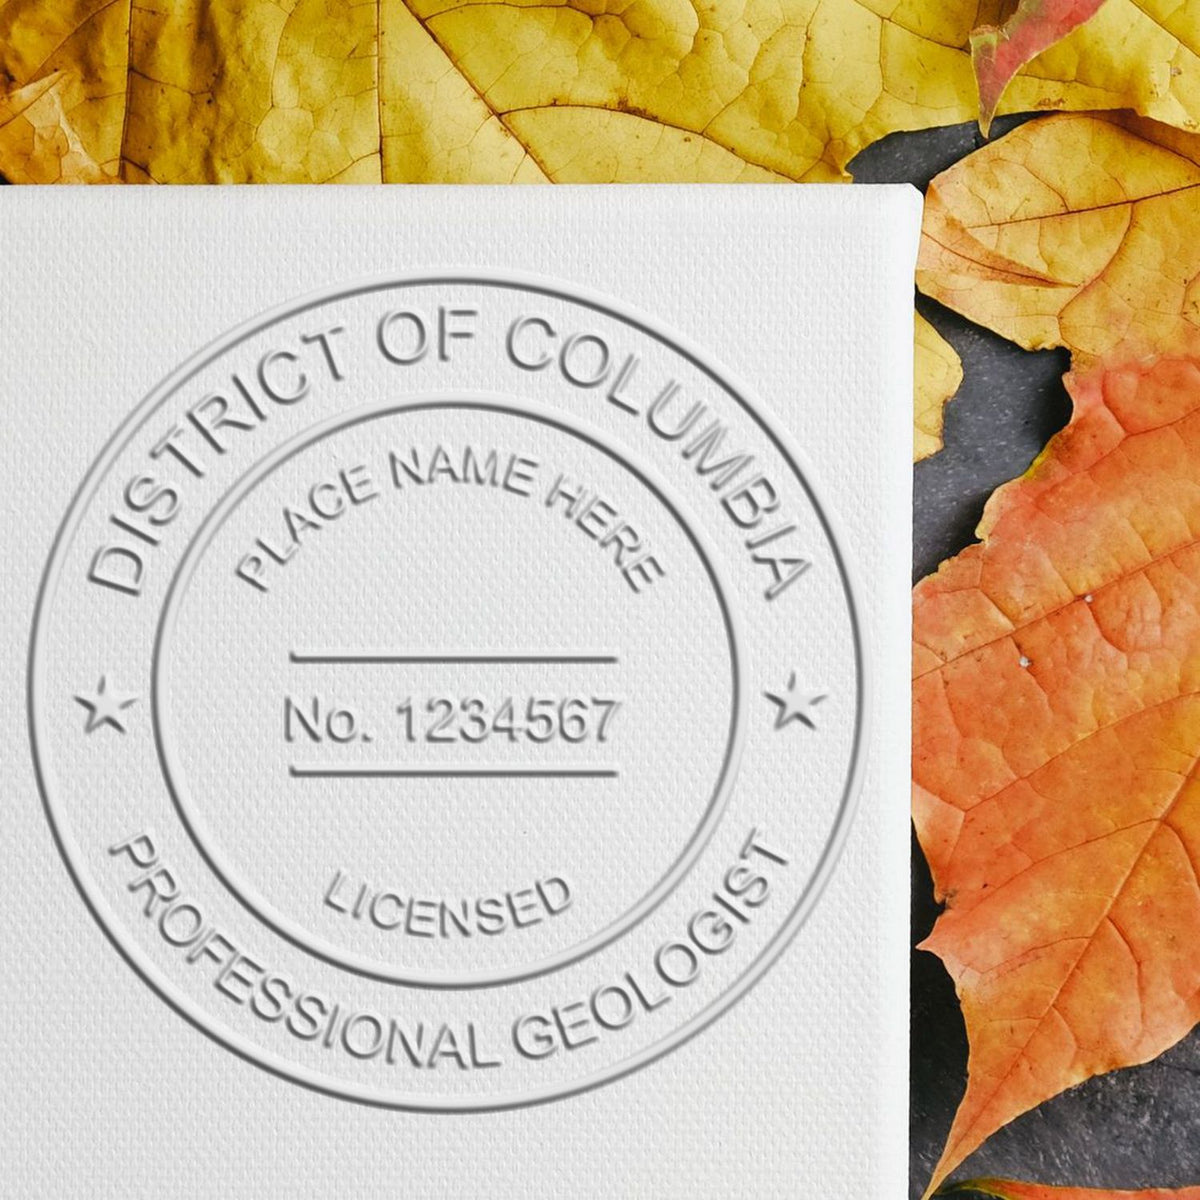 A lifestyle photo showing a stamped image of the Handheld District of Columbia Professional Geologist Embosser on a piece of paper